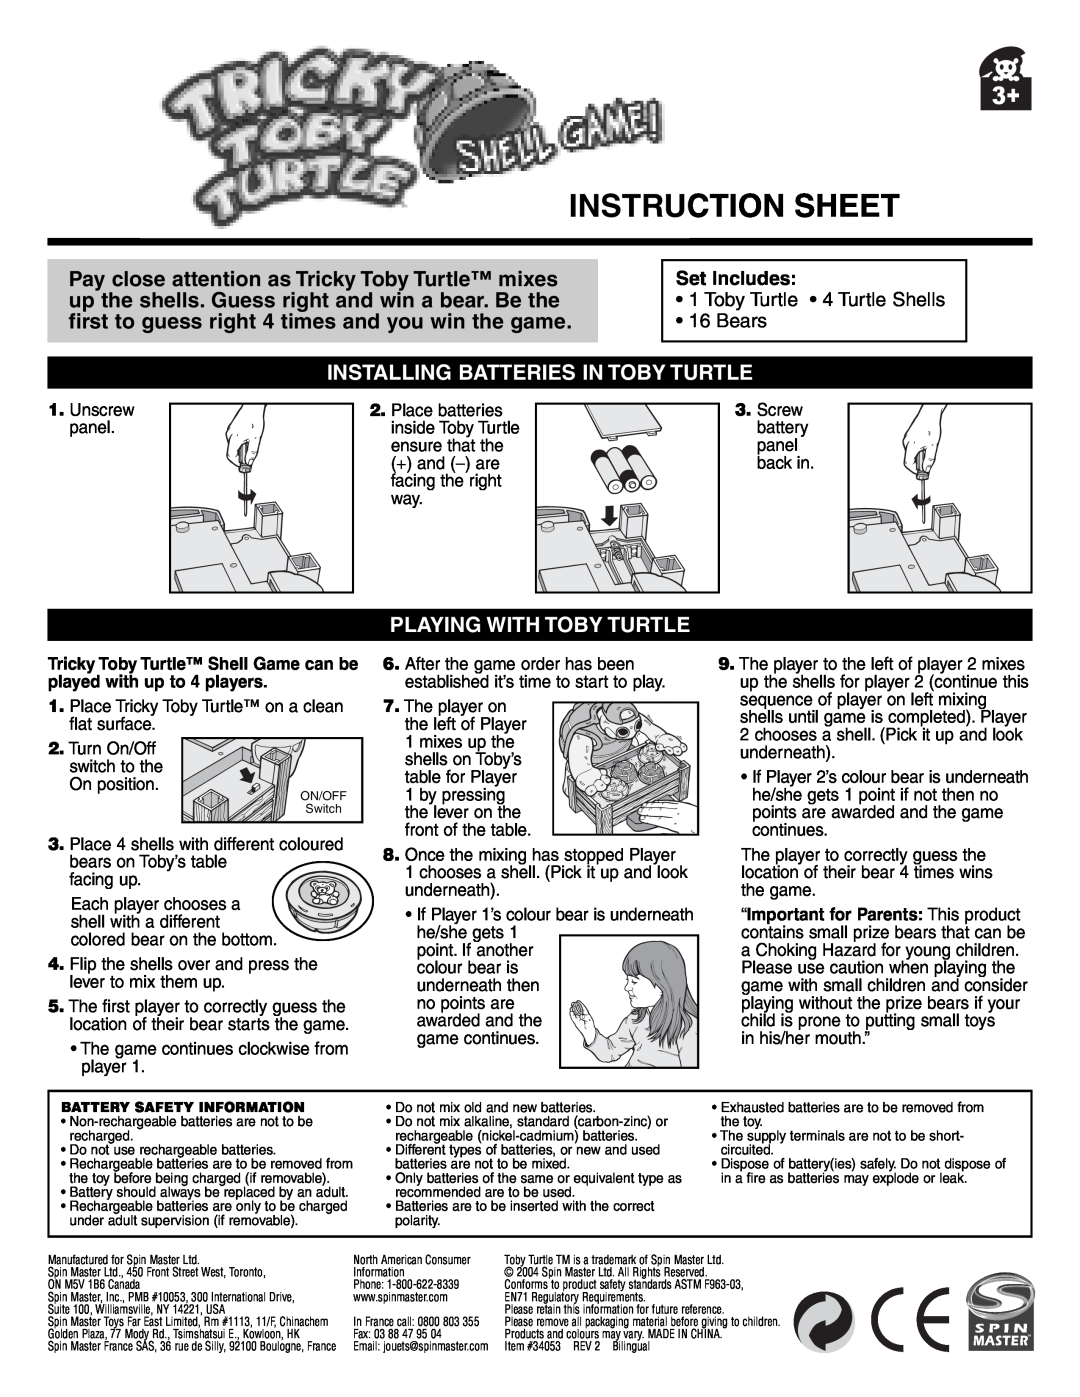 Spin Master Tricky Toby Turtle instruction sheet Instruction Sheet, Installing Batteries In Toby Turtle, Set Includes 